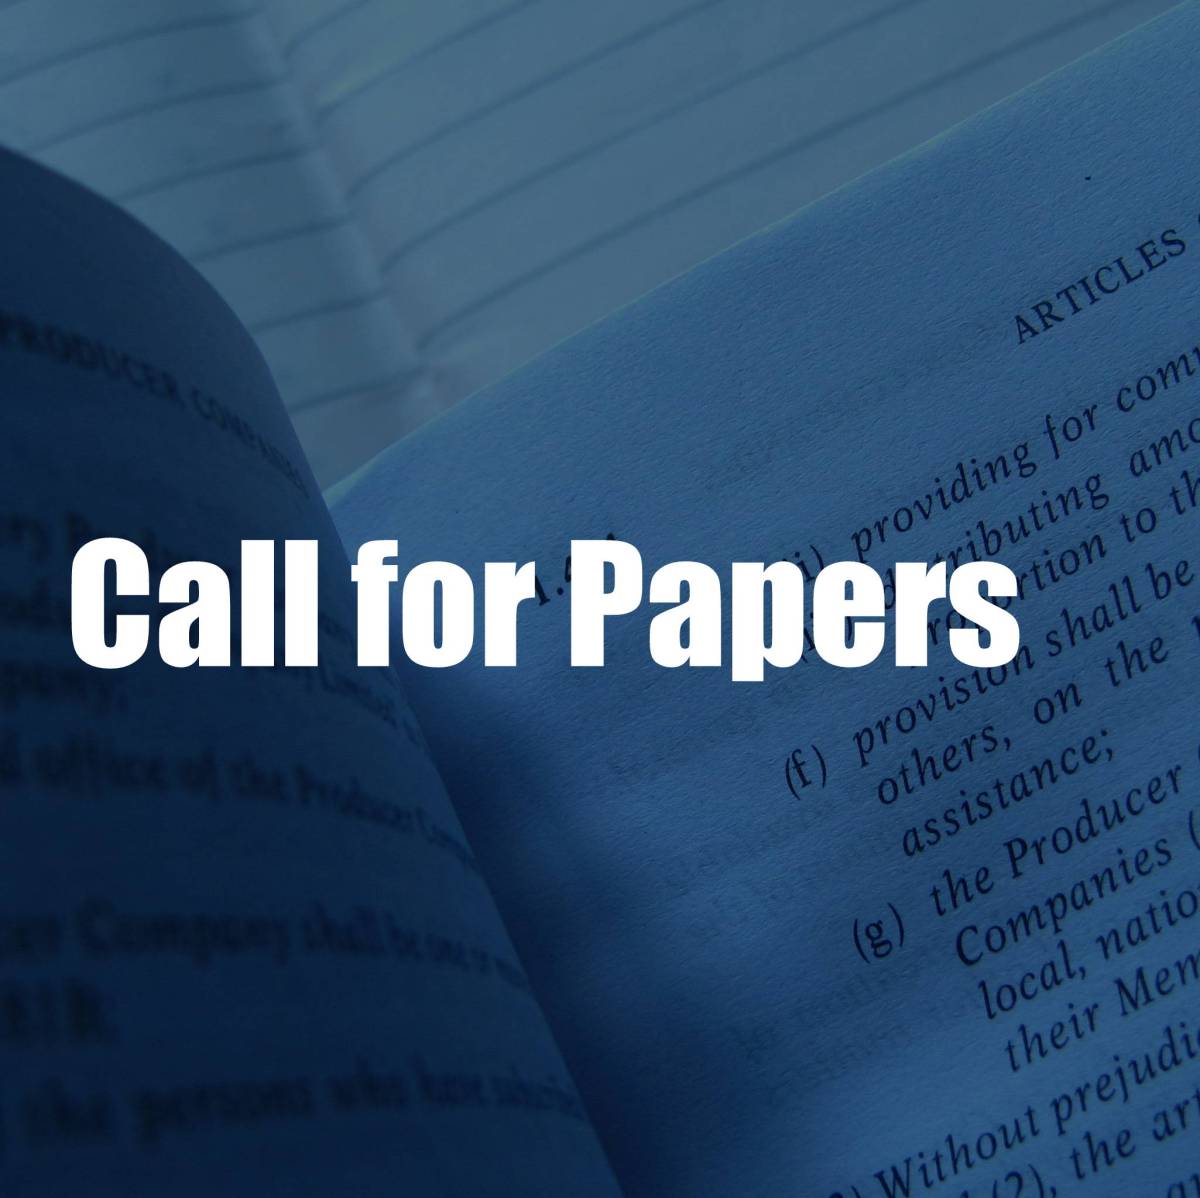 Call for Papers: “Child Rights: Emerging issues and challenges”